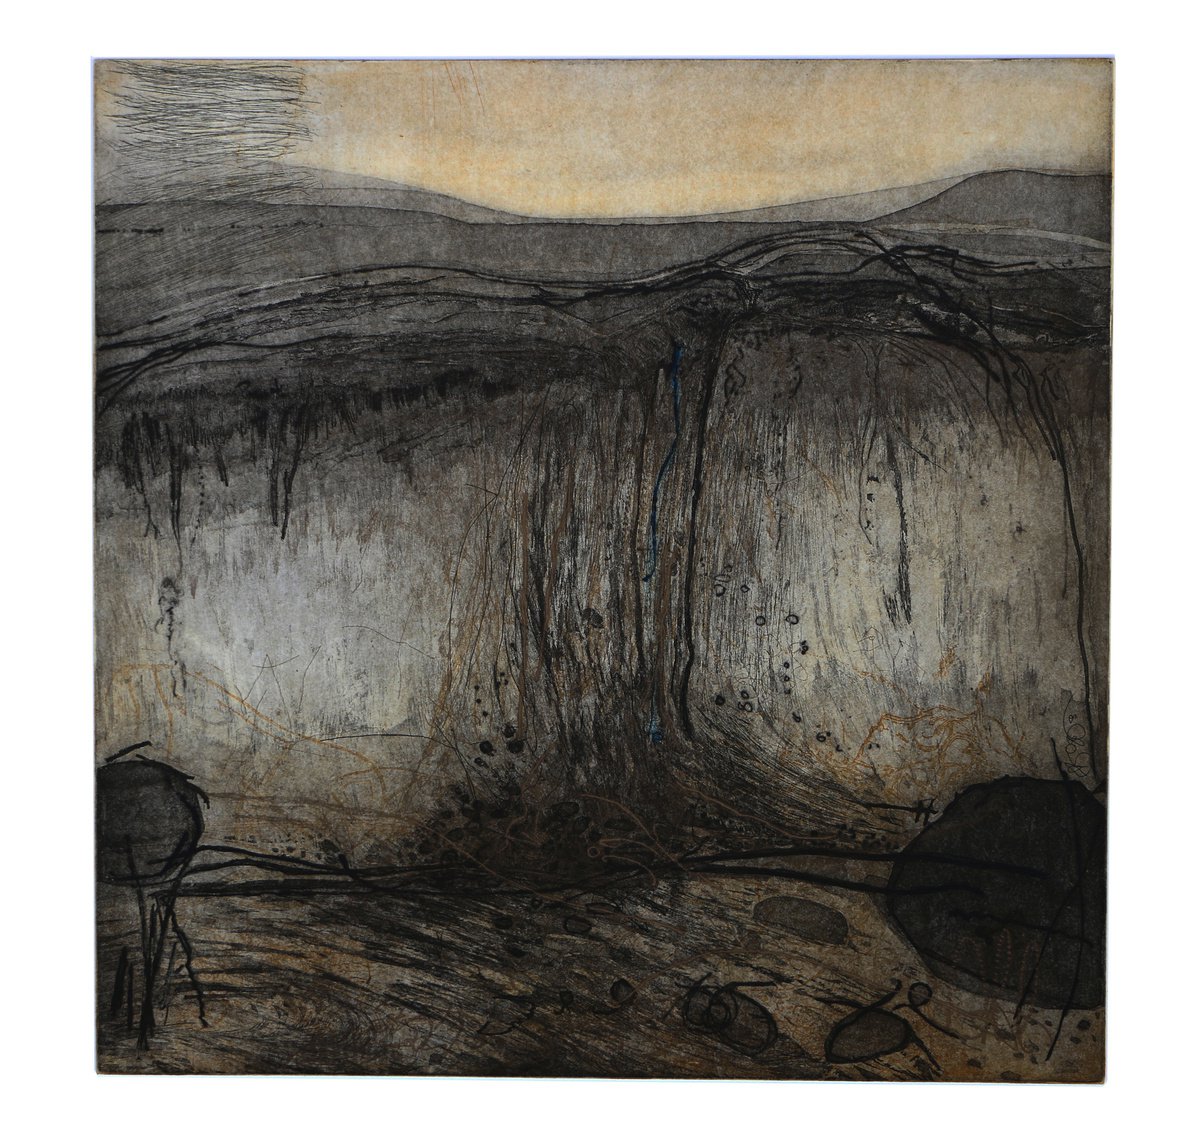 Heike Roesel Rockfall, etching in variation in edition of 15 by Heike Roesel